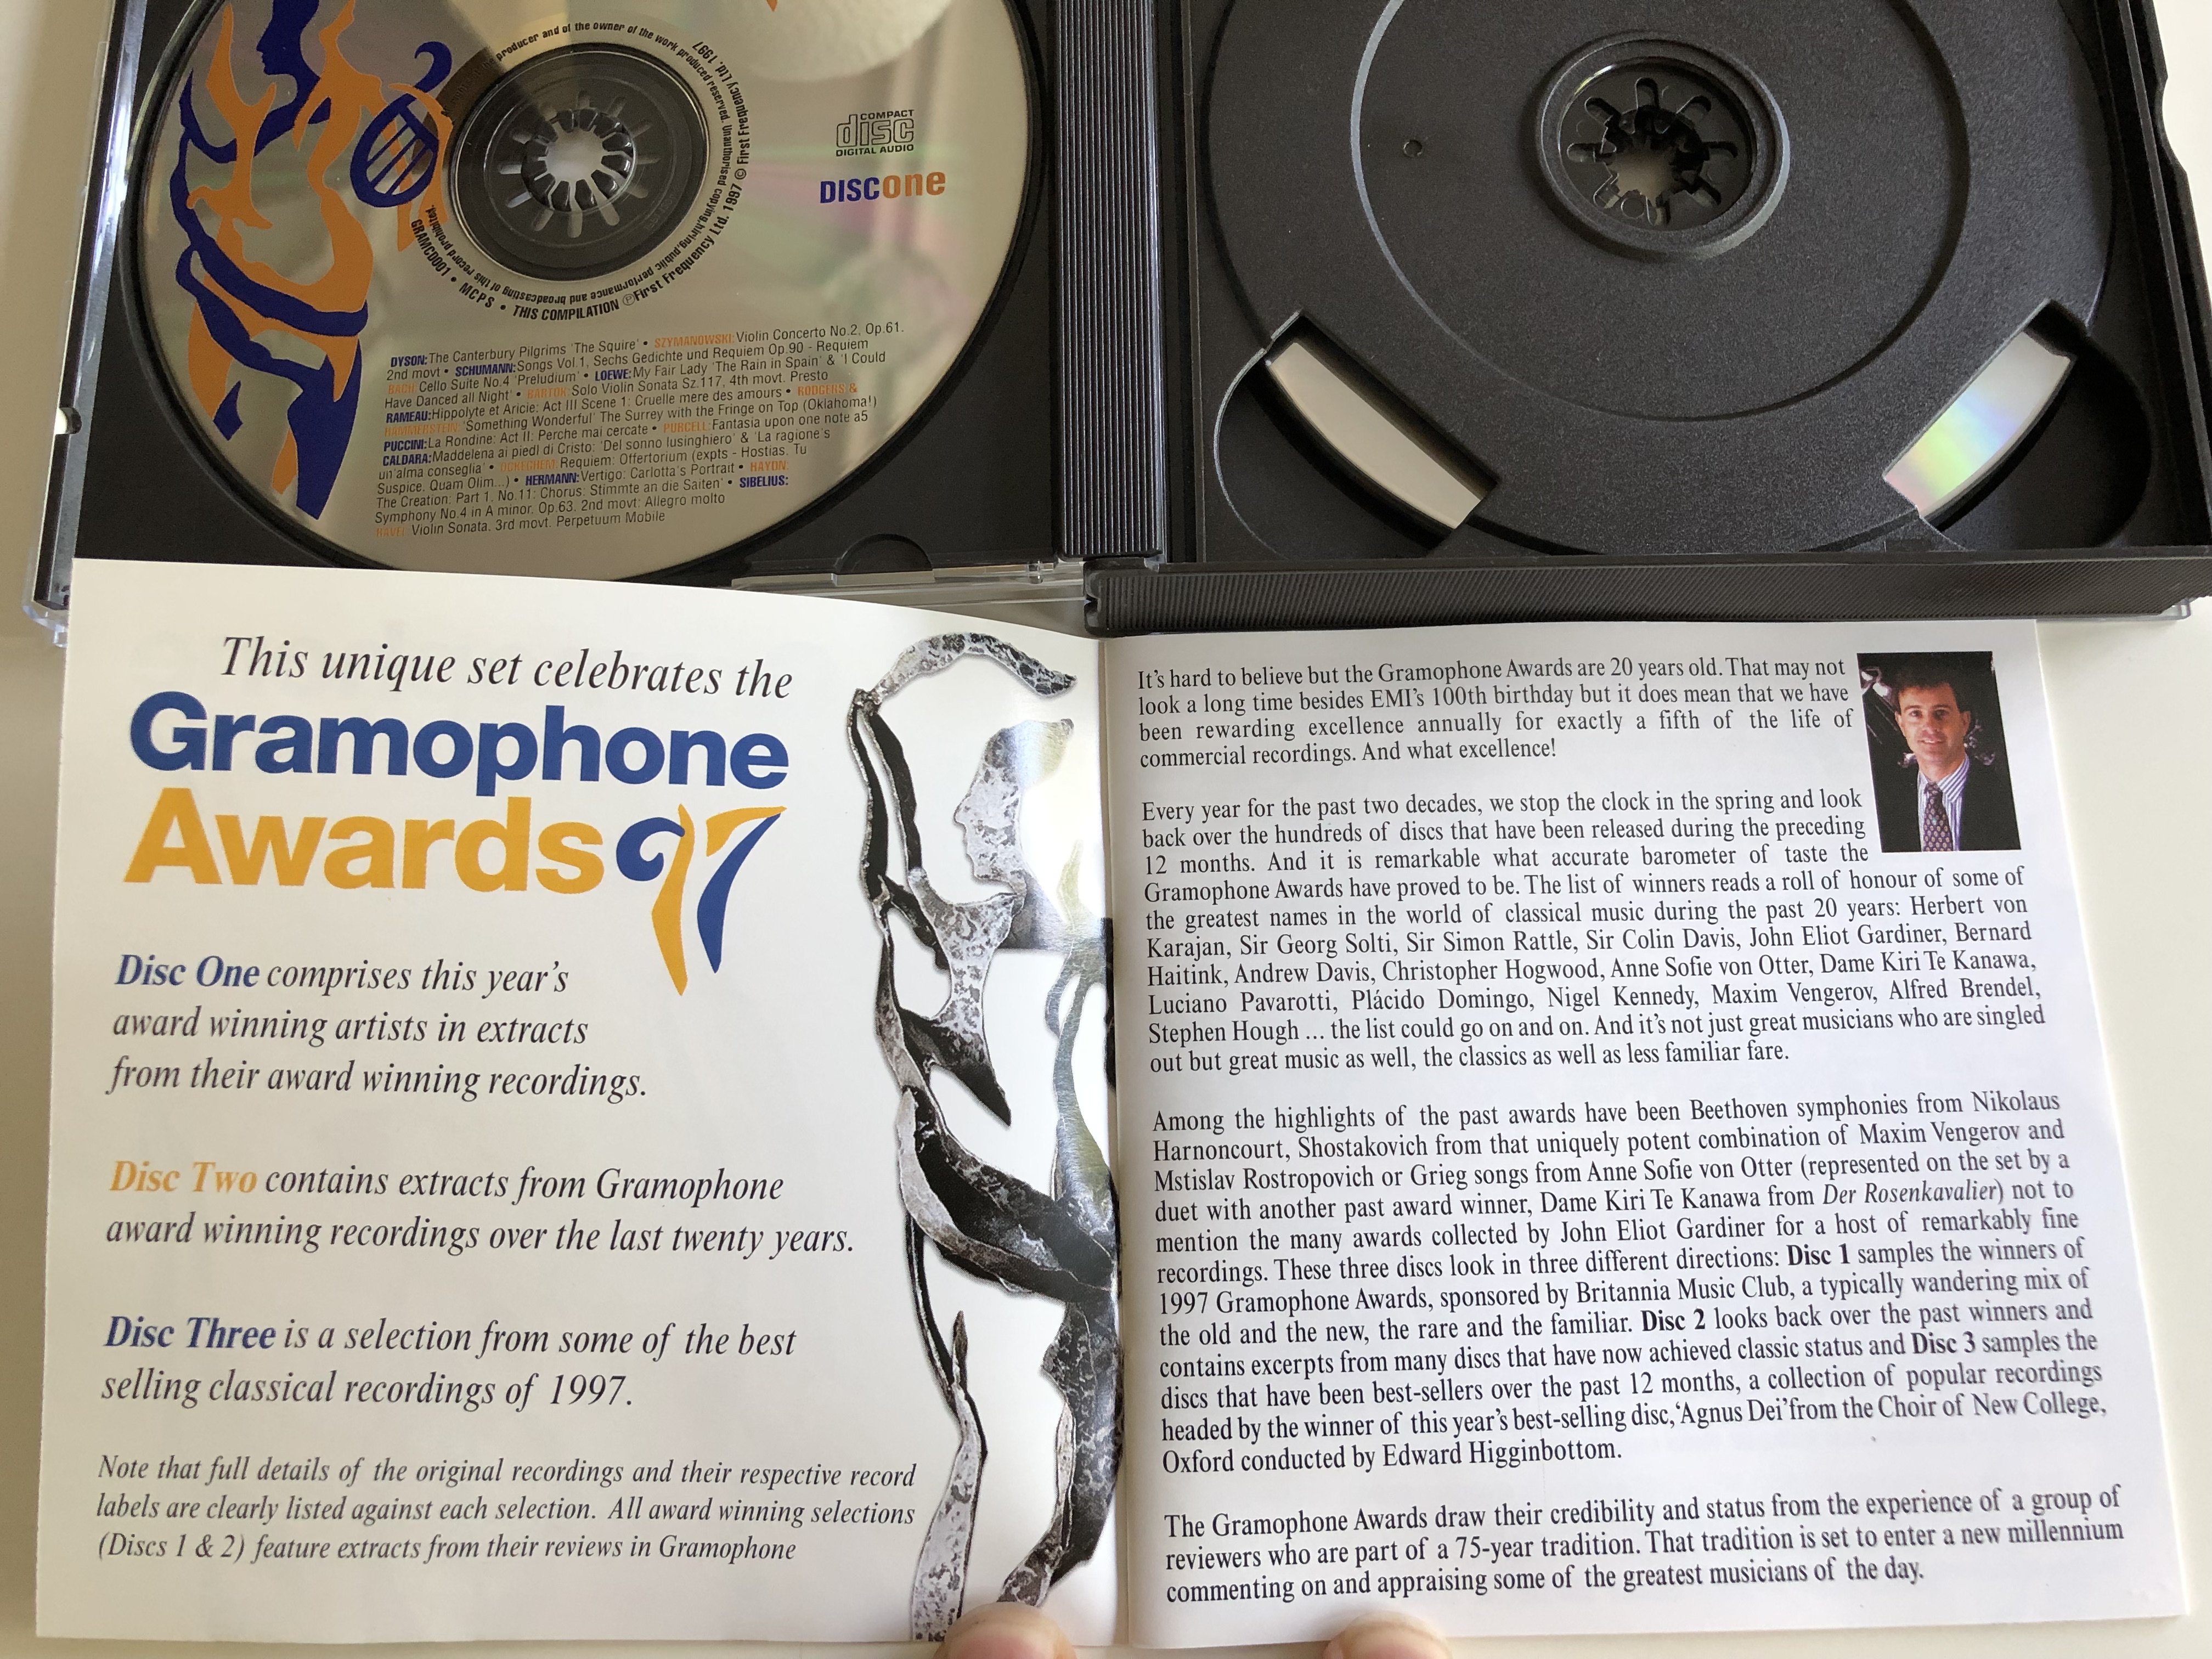 gramophone-awards-a-celebration-of-the-greatest-names-in-classical-music-audio-cd-1997-3-cd-gramcd001-4-.jpg